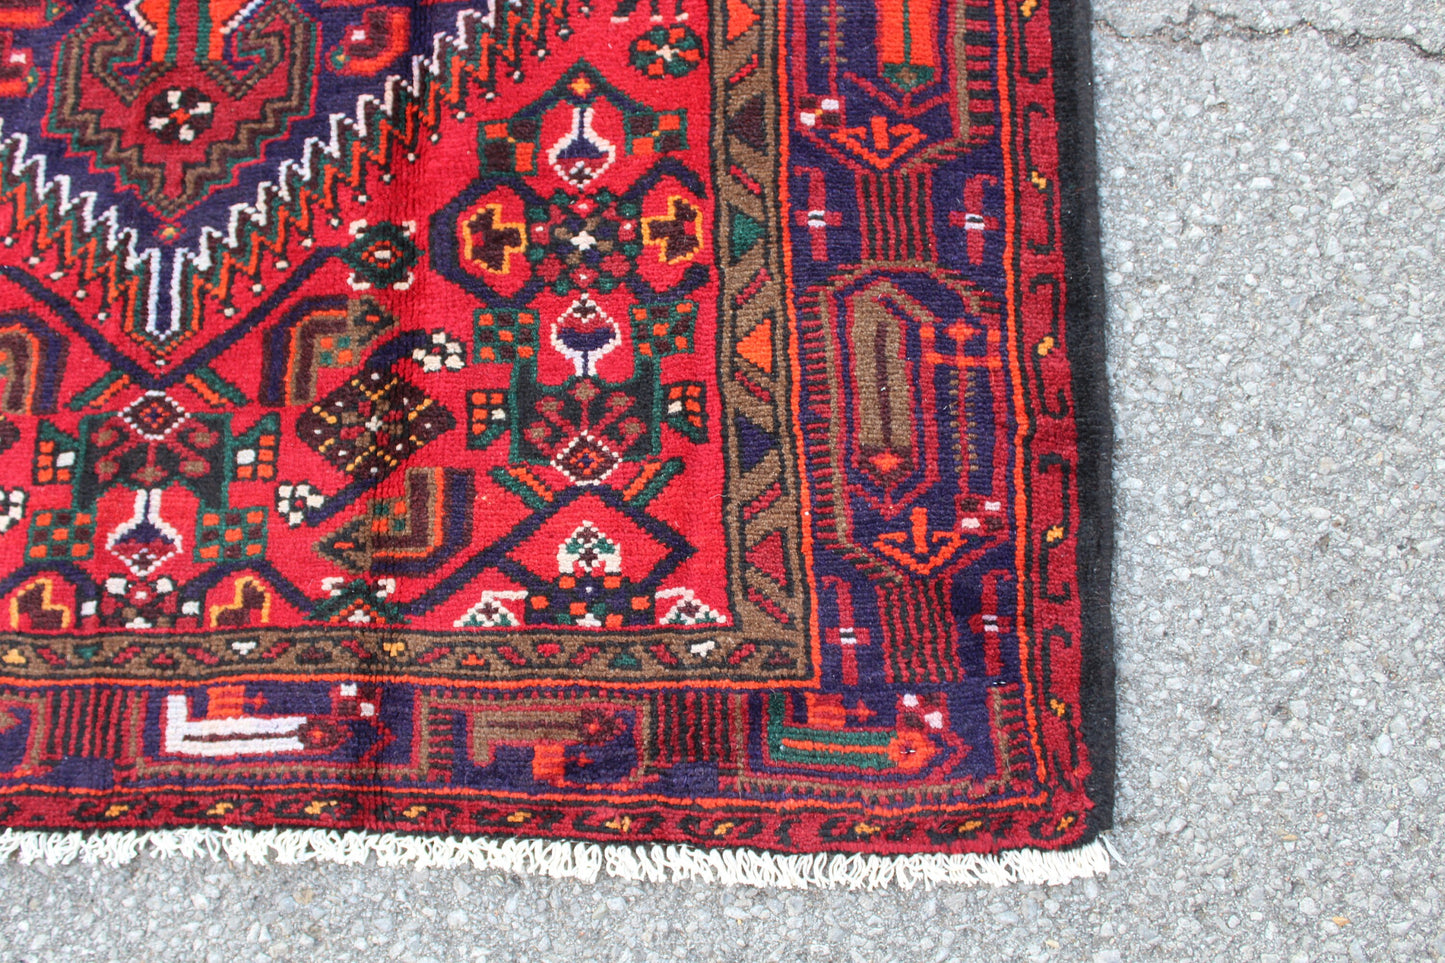 Red 4x6 Hand Knotted Rug with Navy Blue Persian Tribal Designs